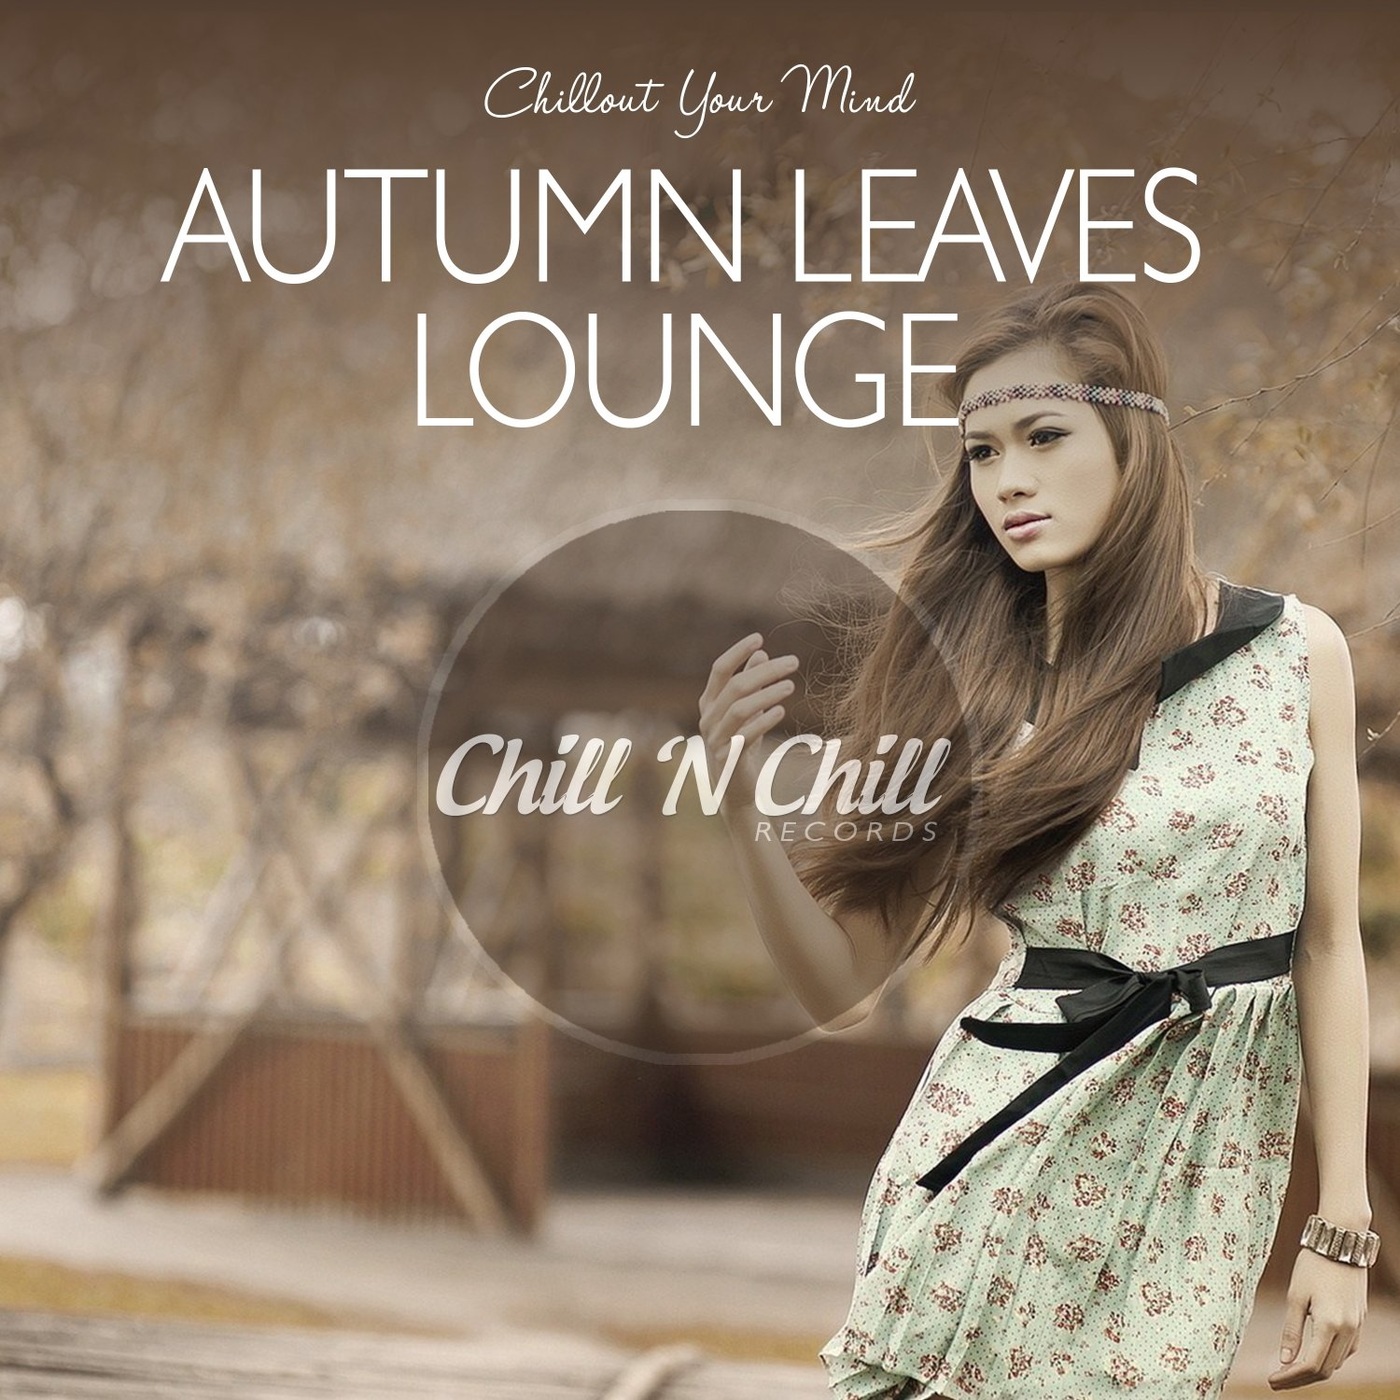 chill n chill records《autumn leaves lounge：chillout your mind》